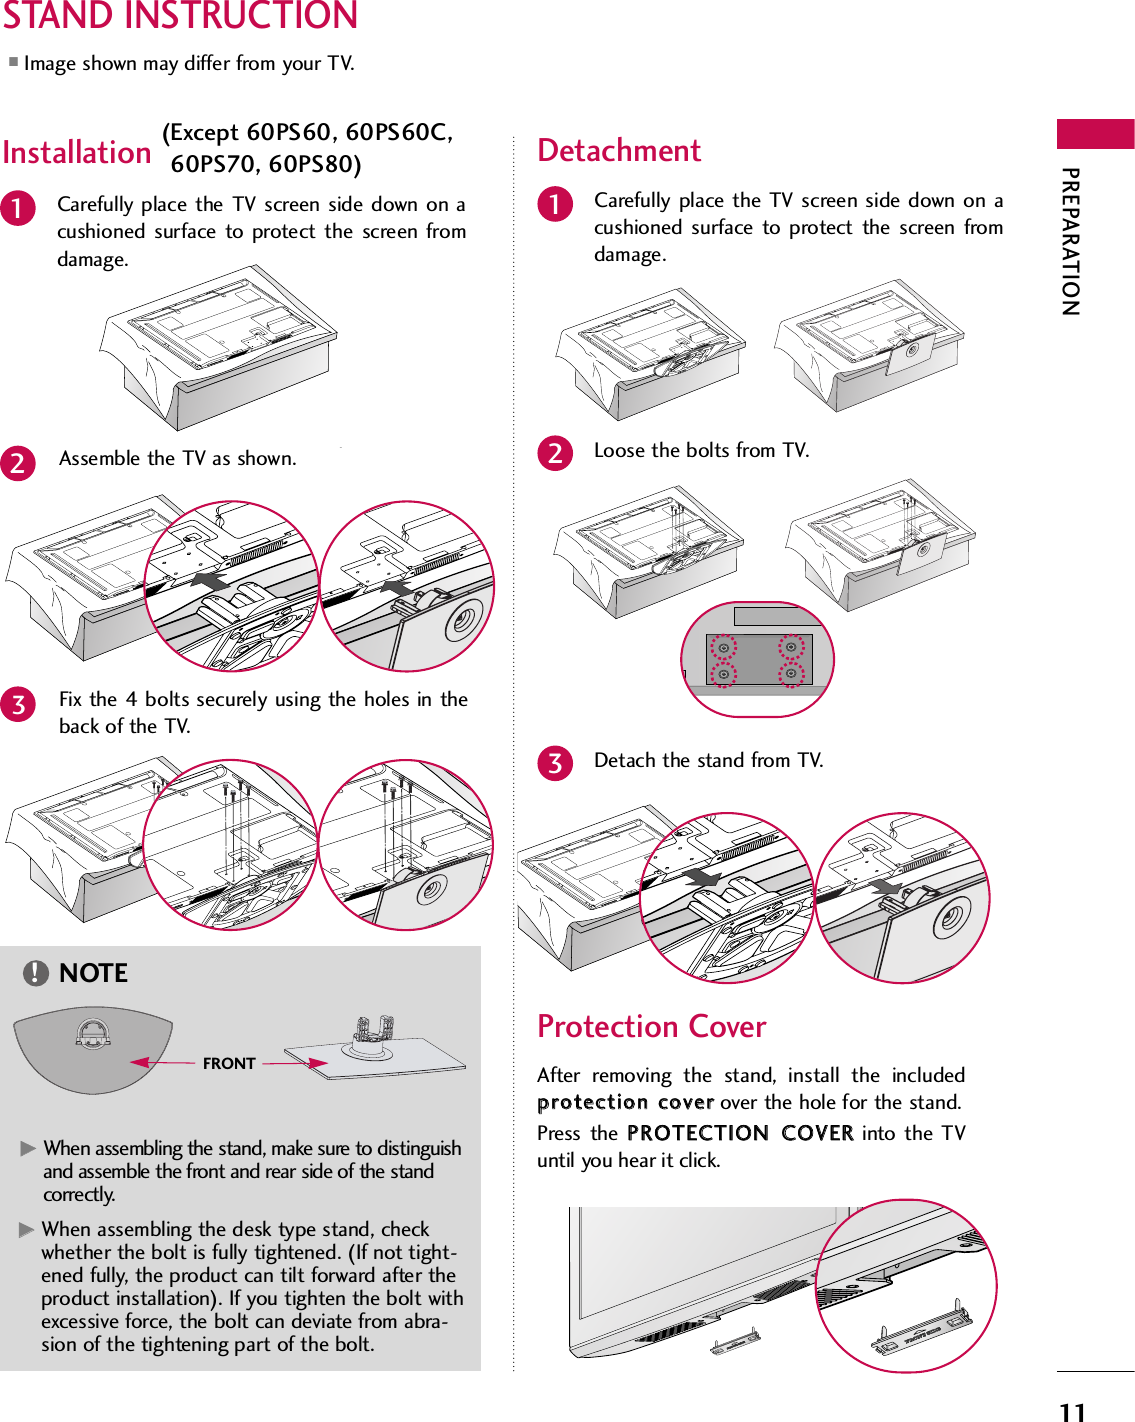 PREPARATION11STAND INSTRUCTION■Image shown may differ from your TV.Carefully place the TV screen side down on acushioned surface to protect the screen fromdamage.Assemble the TV as shown.12Fix the 4 bolts securely using the holes in theback of the TV.3Carefully place the TV screen side down on acushioned surface to protect the screen fromdamage.1Loose the bolts from TV.2Detach the stand from TV.3After removing the stand, install the includedpprrootteeccttiioonn  ccoovveerrover the hole for the stand.Press the PPRROOTTEECCTTIIOONN  CCOOVVEERRinto the TVuntil you hear it click.Protection CoverGGWhen assembling the desk type stand, checkwhether the bolt is fully tightened. (If not tight-ened fully, the product can tilt forward after theproduct installation). If you tighten the bolt withexcessive force, the bolt can deviate from abra-sion of the tightening part of the bolt.NOTE!Installation  DetachmentGGWhen assembling the stand, make sure to distinguishand assemble the front and rear side of the standcorrectly.(Except 60PS60, 60PS60C,60PS70, 60PS80)FRONT